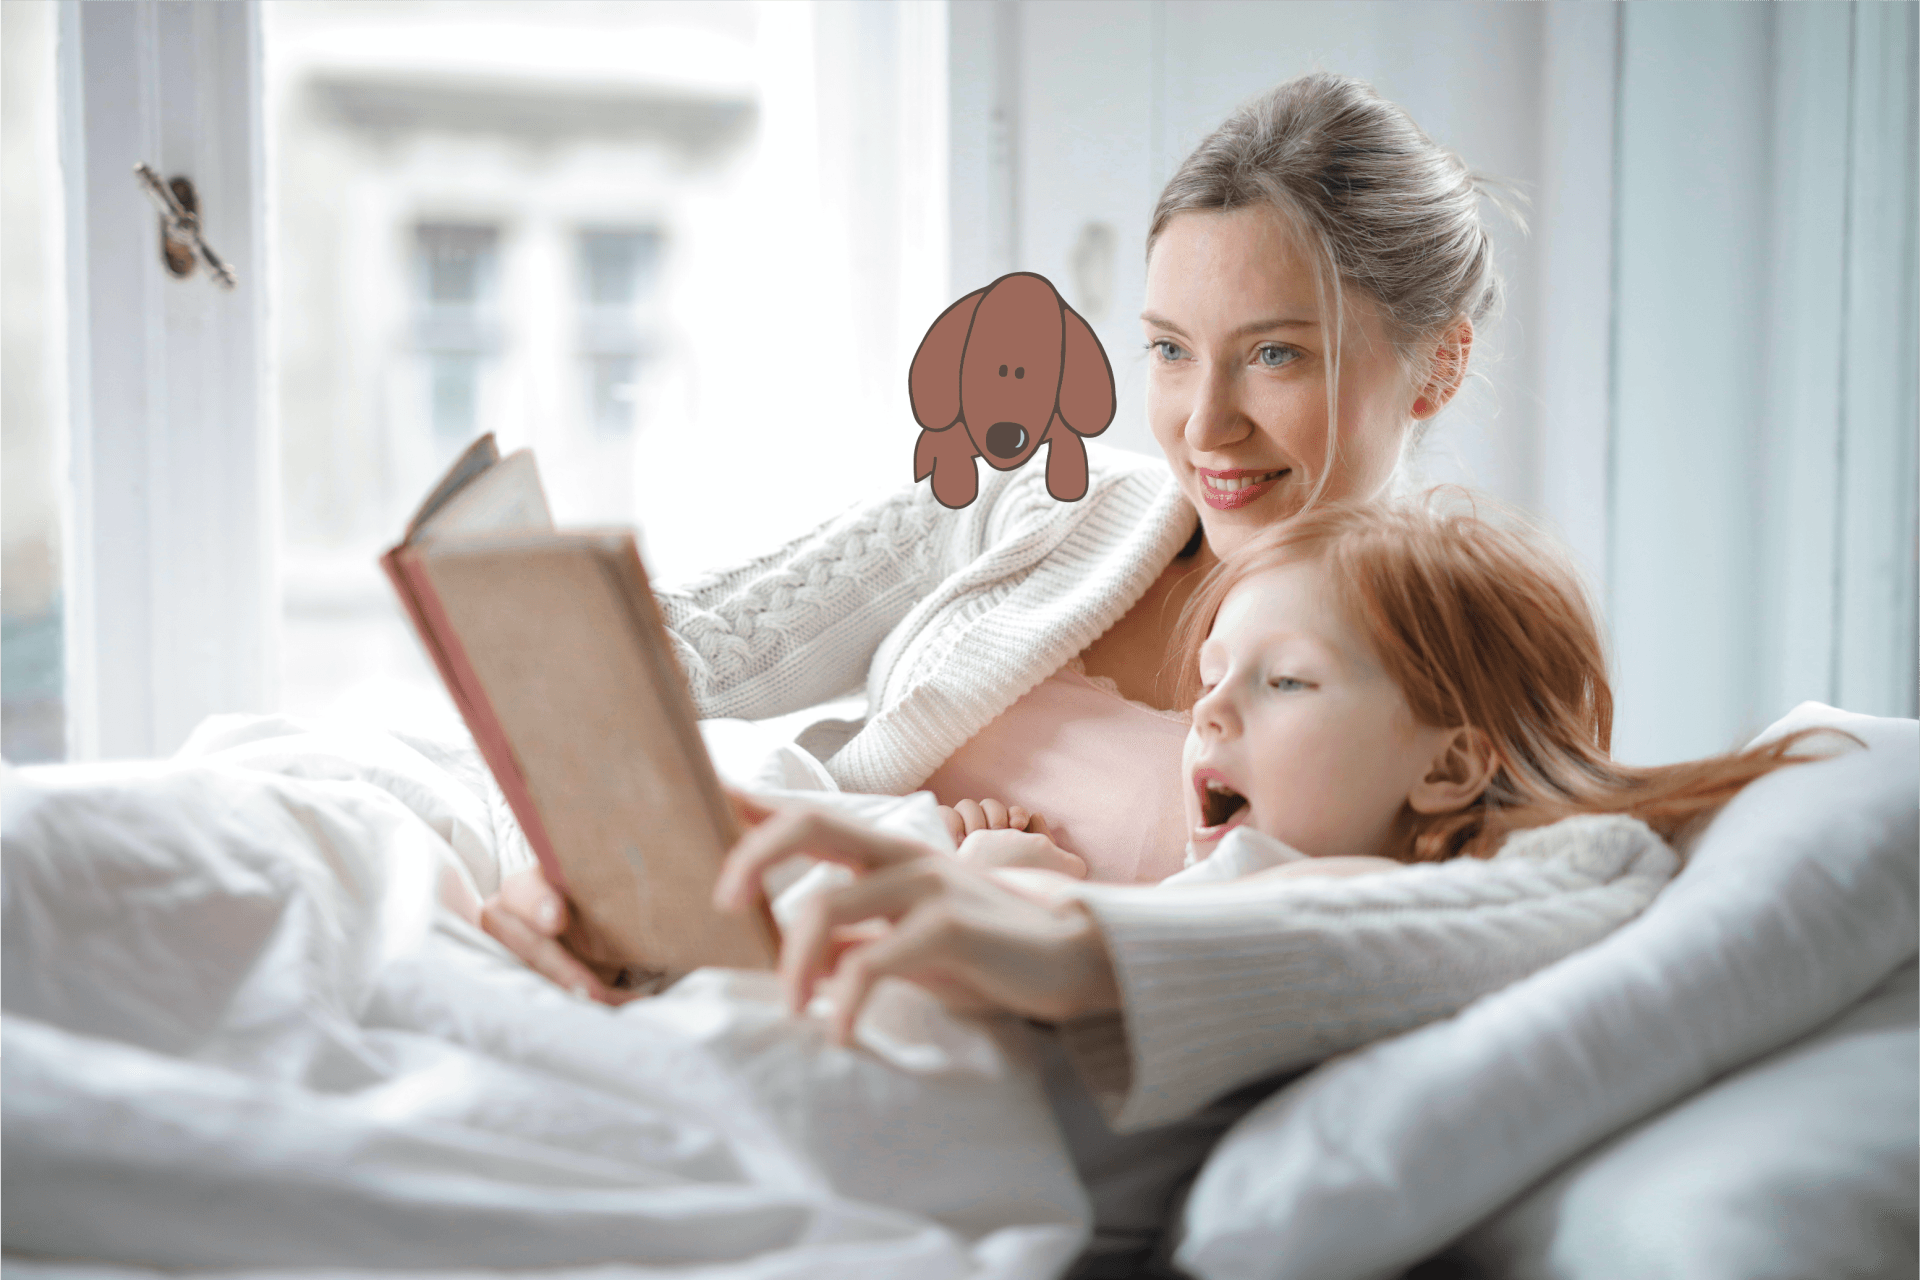 A woman is reading a book to a little girl in bed.